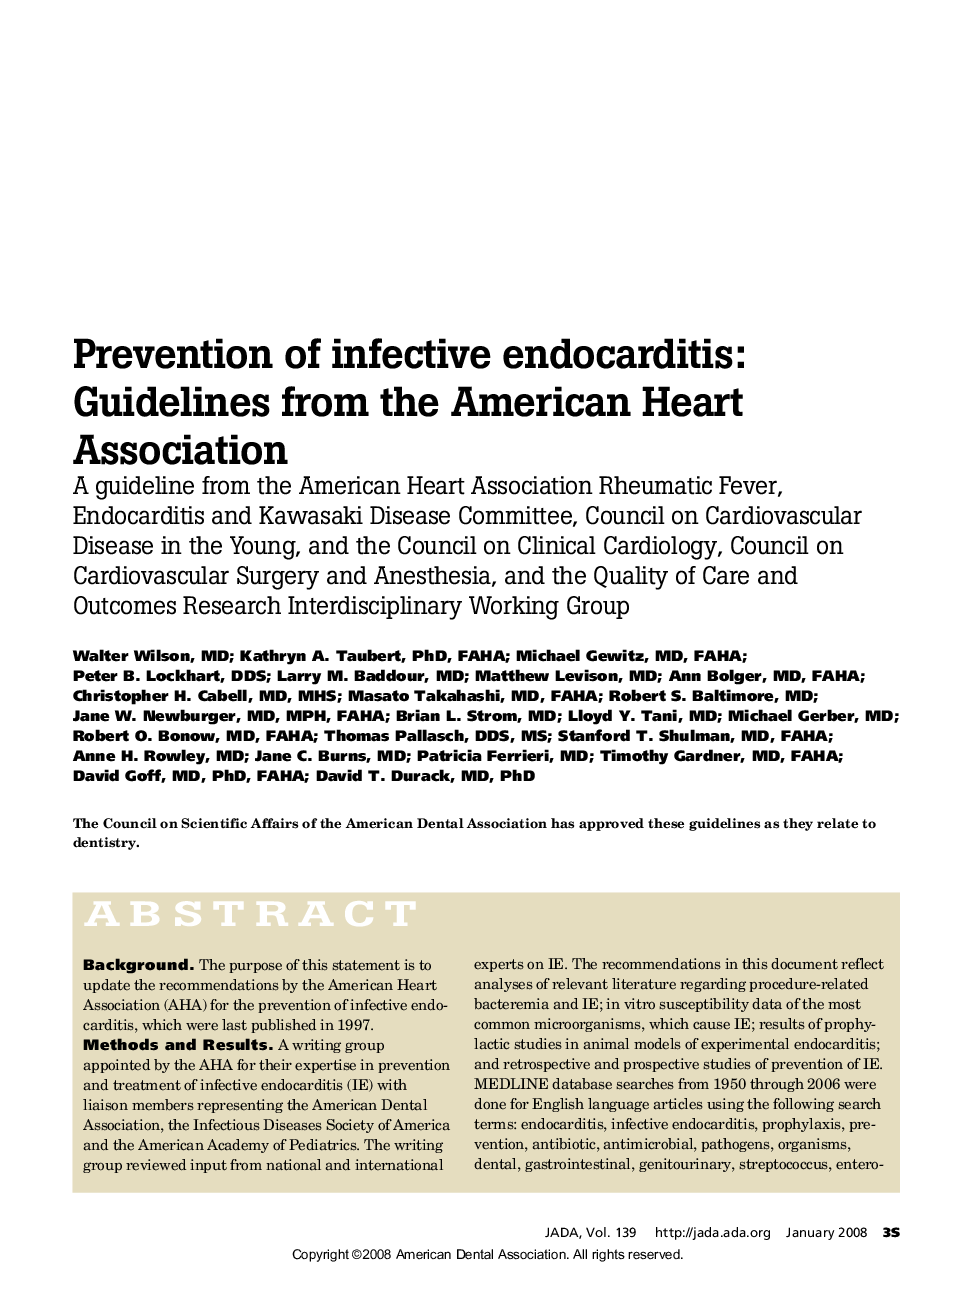 Prevention of infective endocarditis: Guidelines from the American Heart Association